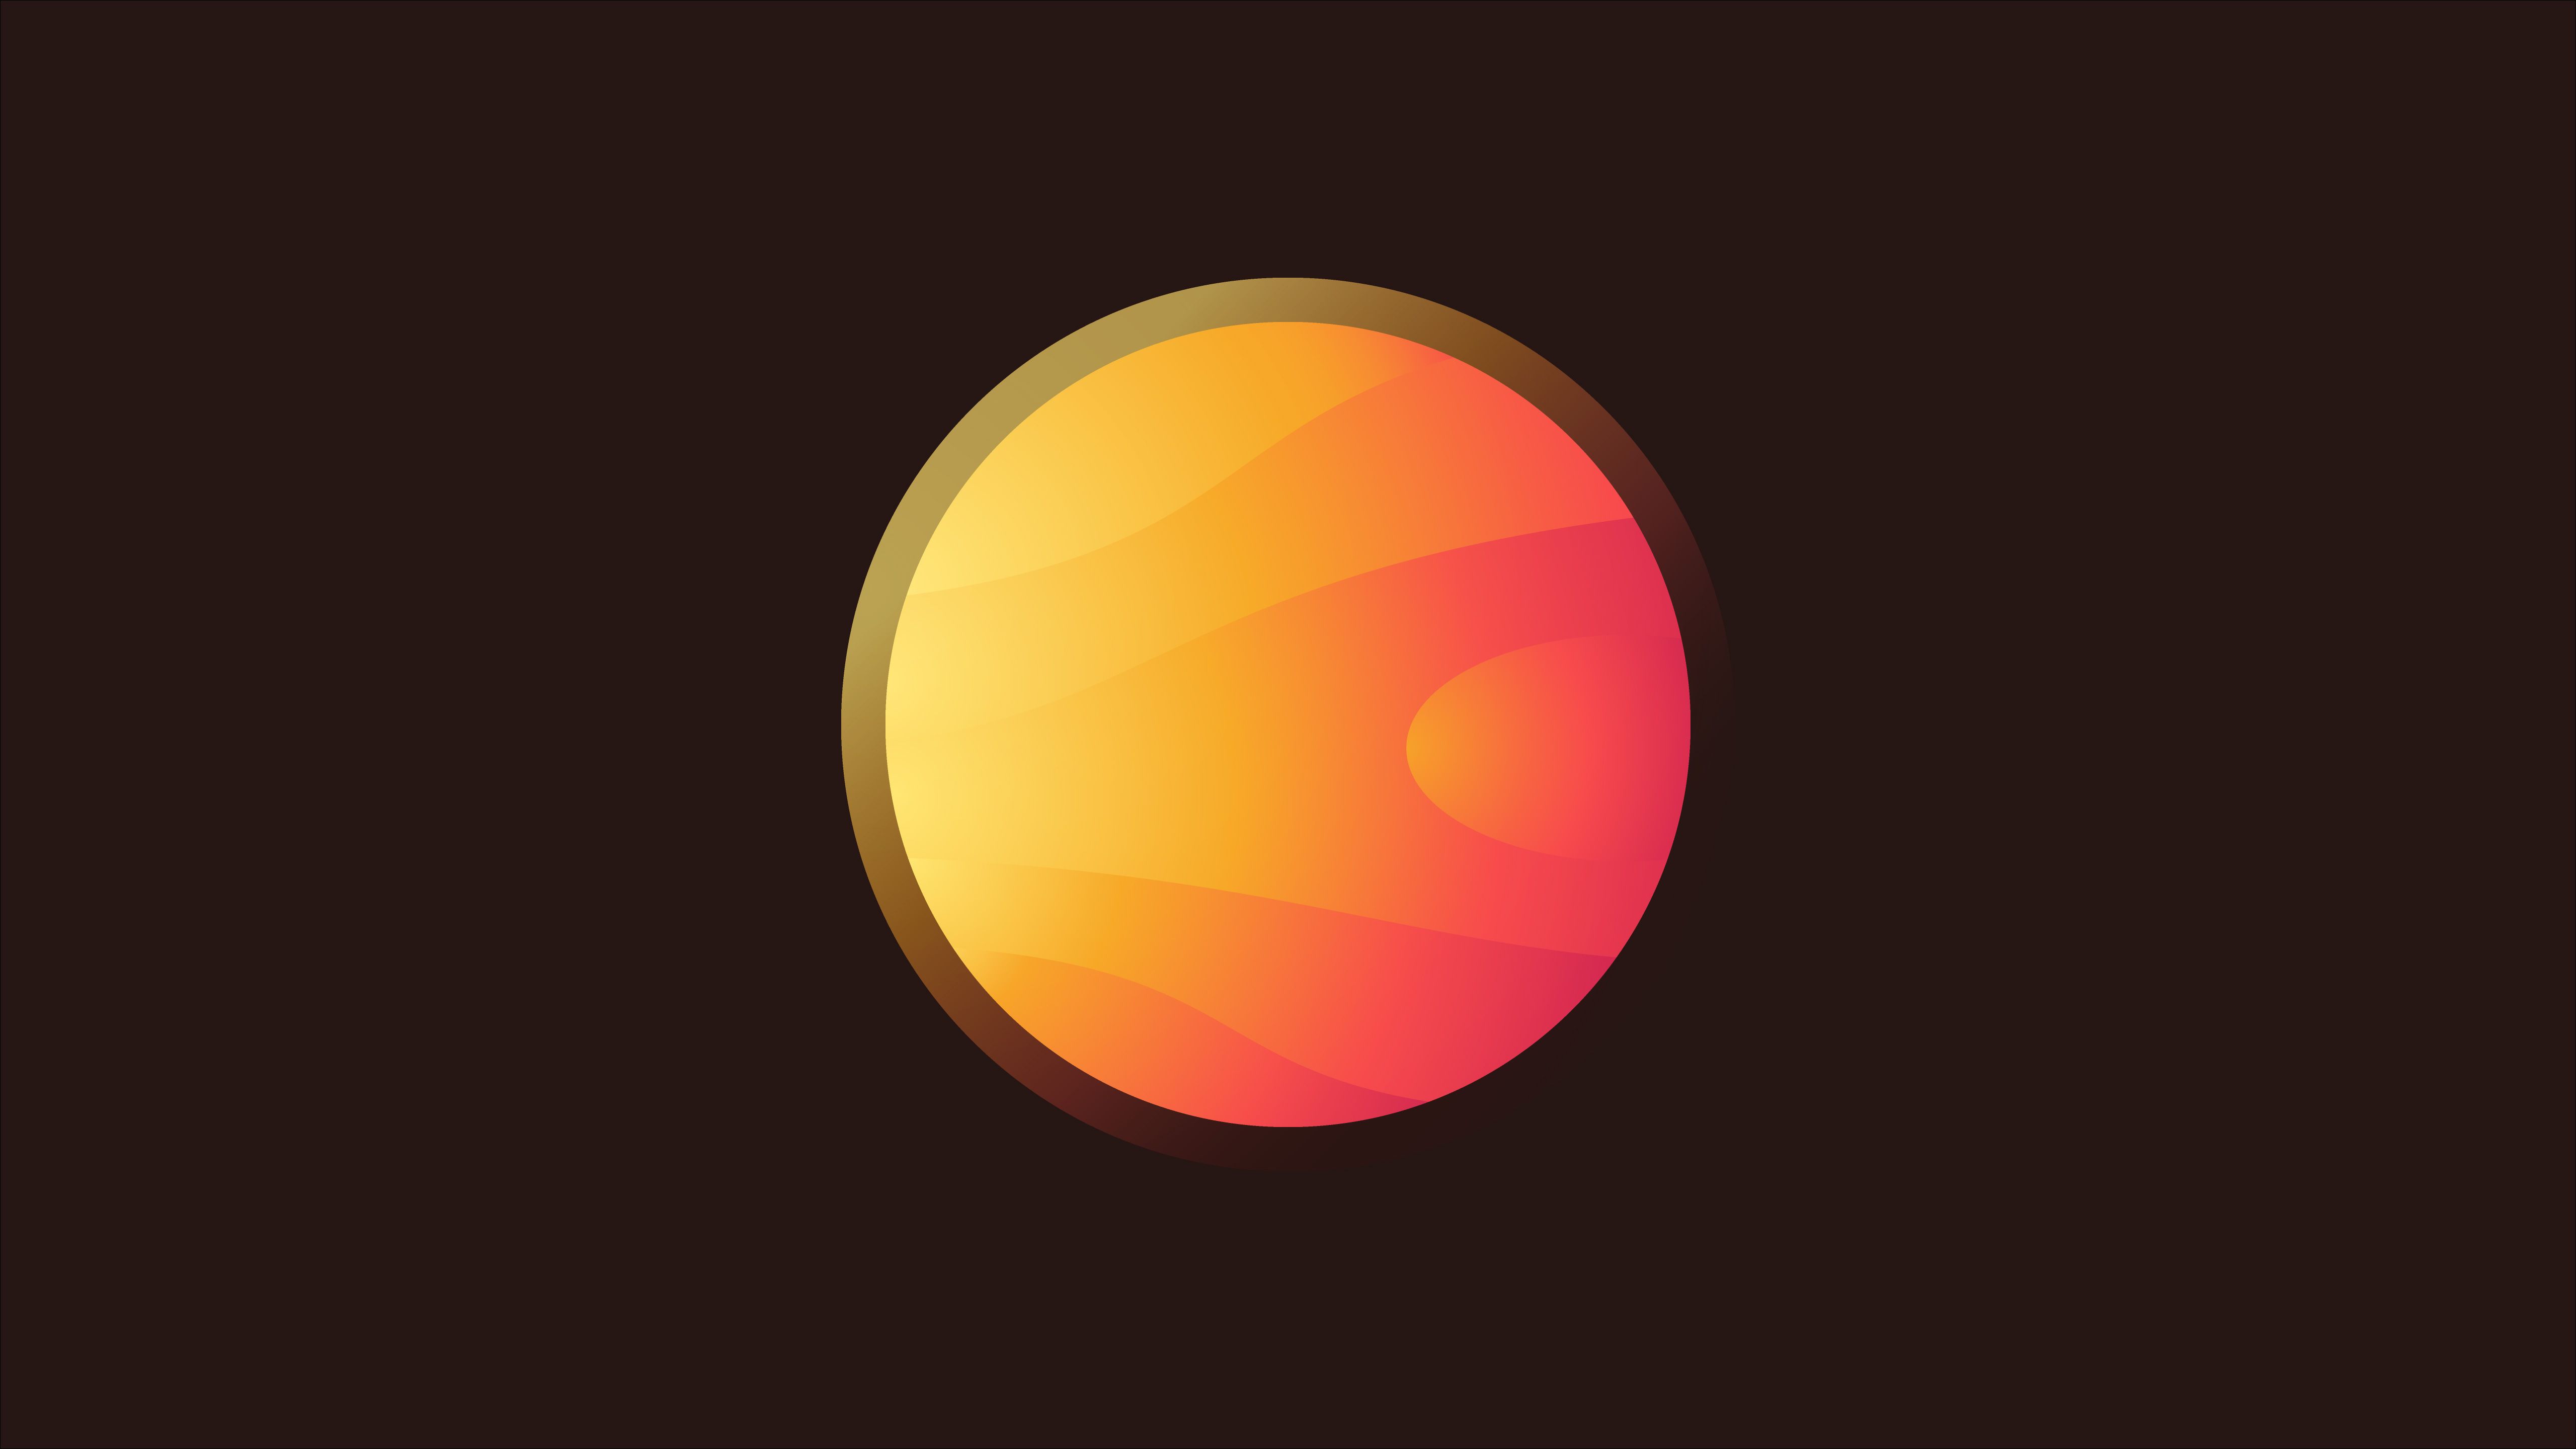 5k Sun Planet Minimalist, HD Artist, 4k Wallpaper, Image, Background, Photo and Picture